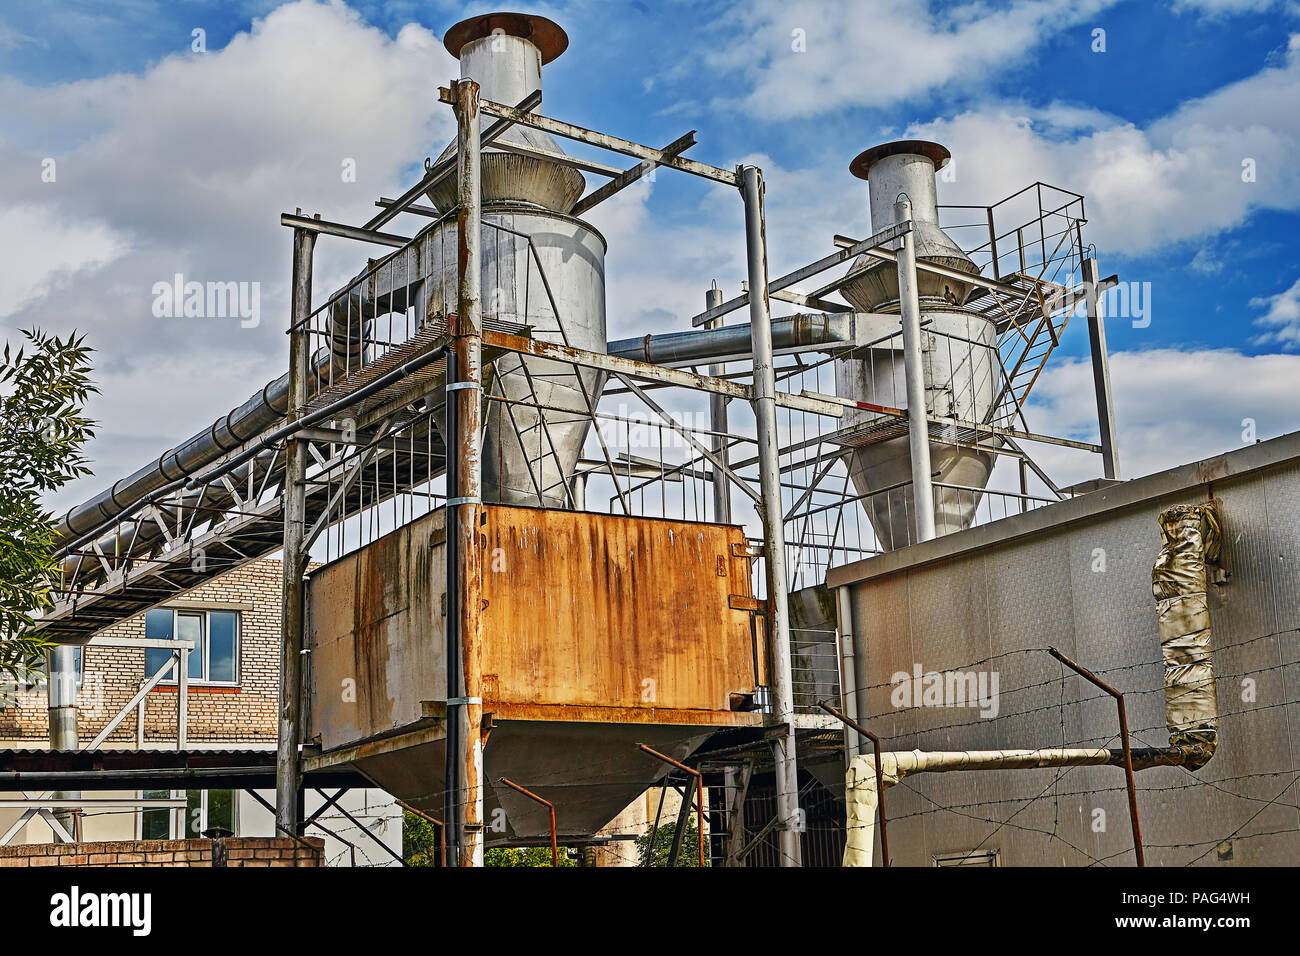 Vitebsk, Belarus - July 7, 2018: Grain silo on  large-scale bakery cabled for unloading. Stock Photo